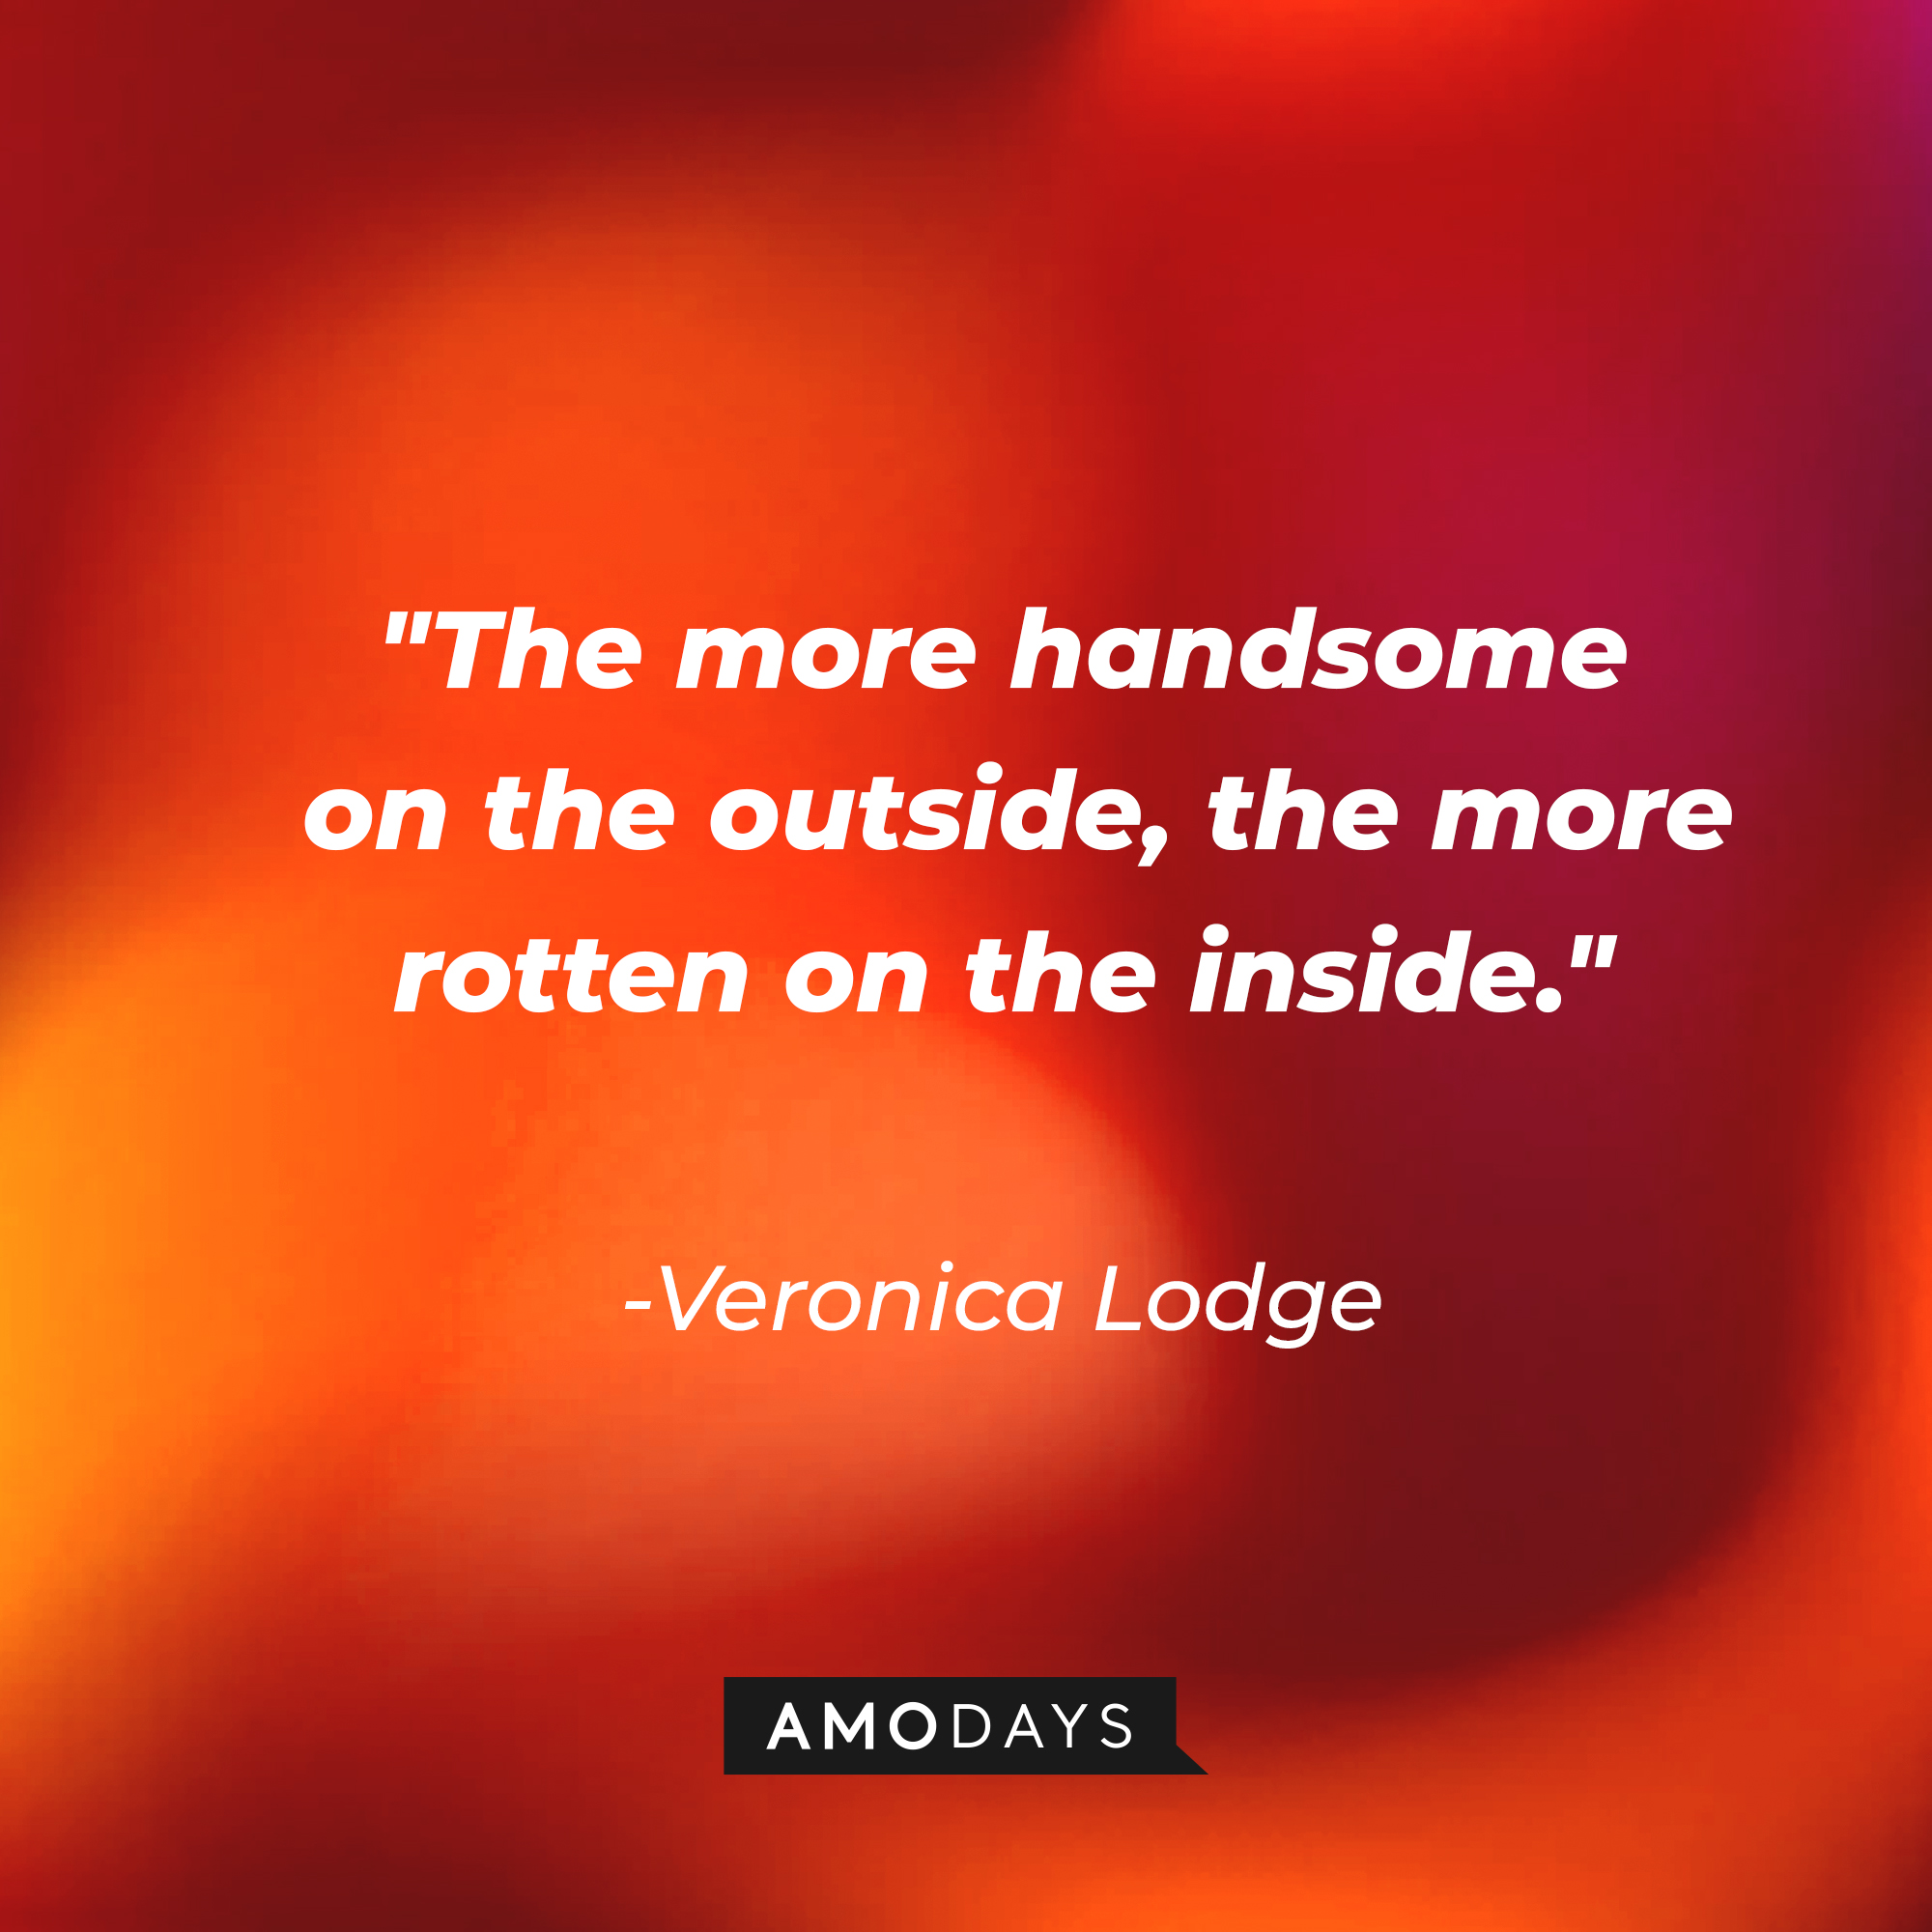 Veronica Lodge's quote: "The more handsome on the outside, the more rotten on the inside." | Source: AmoDays